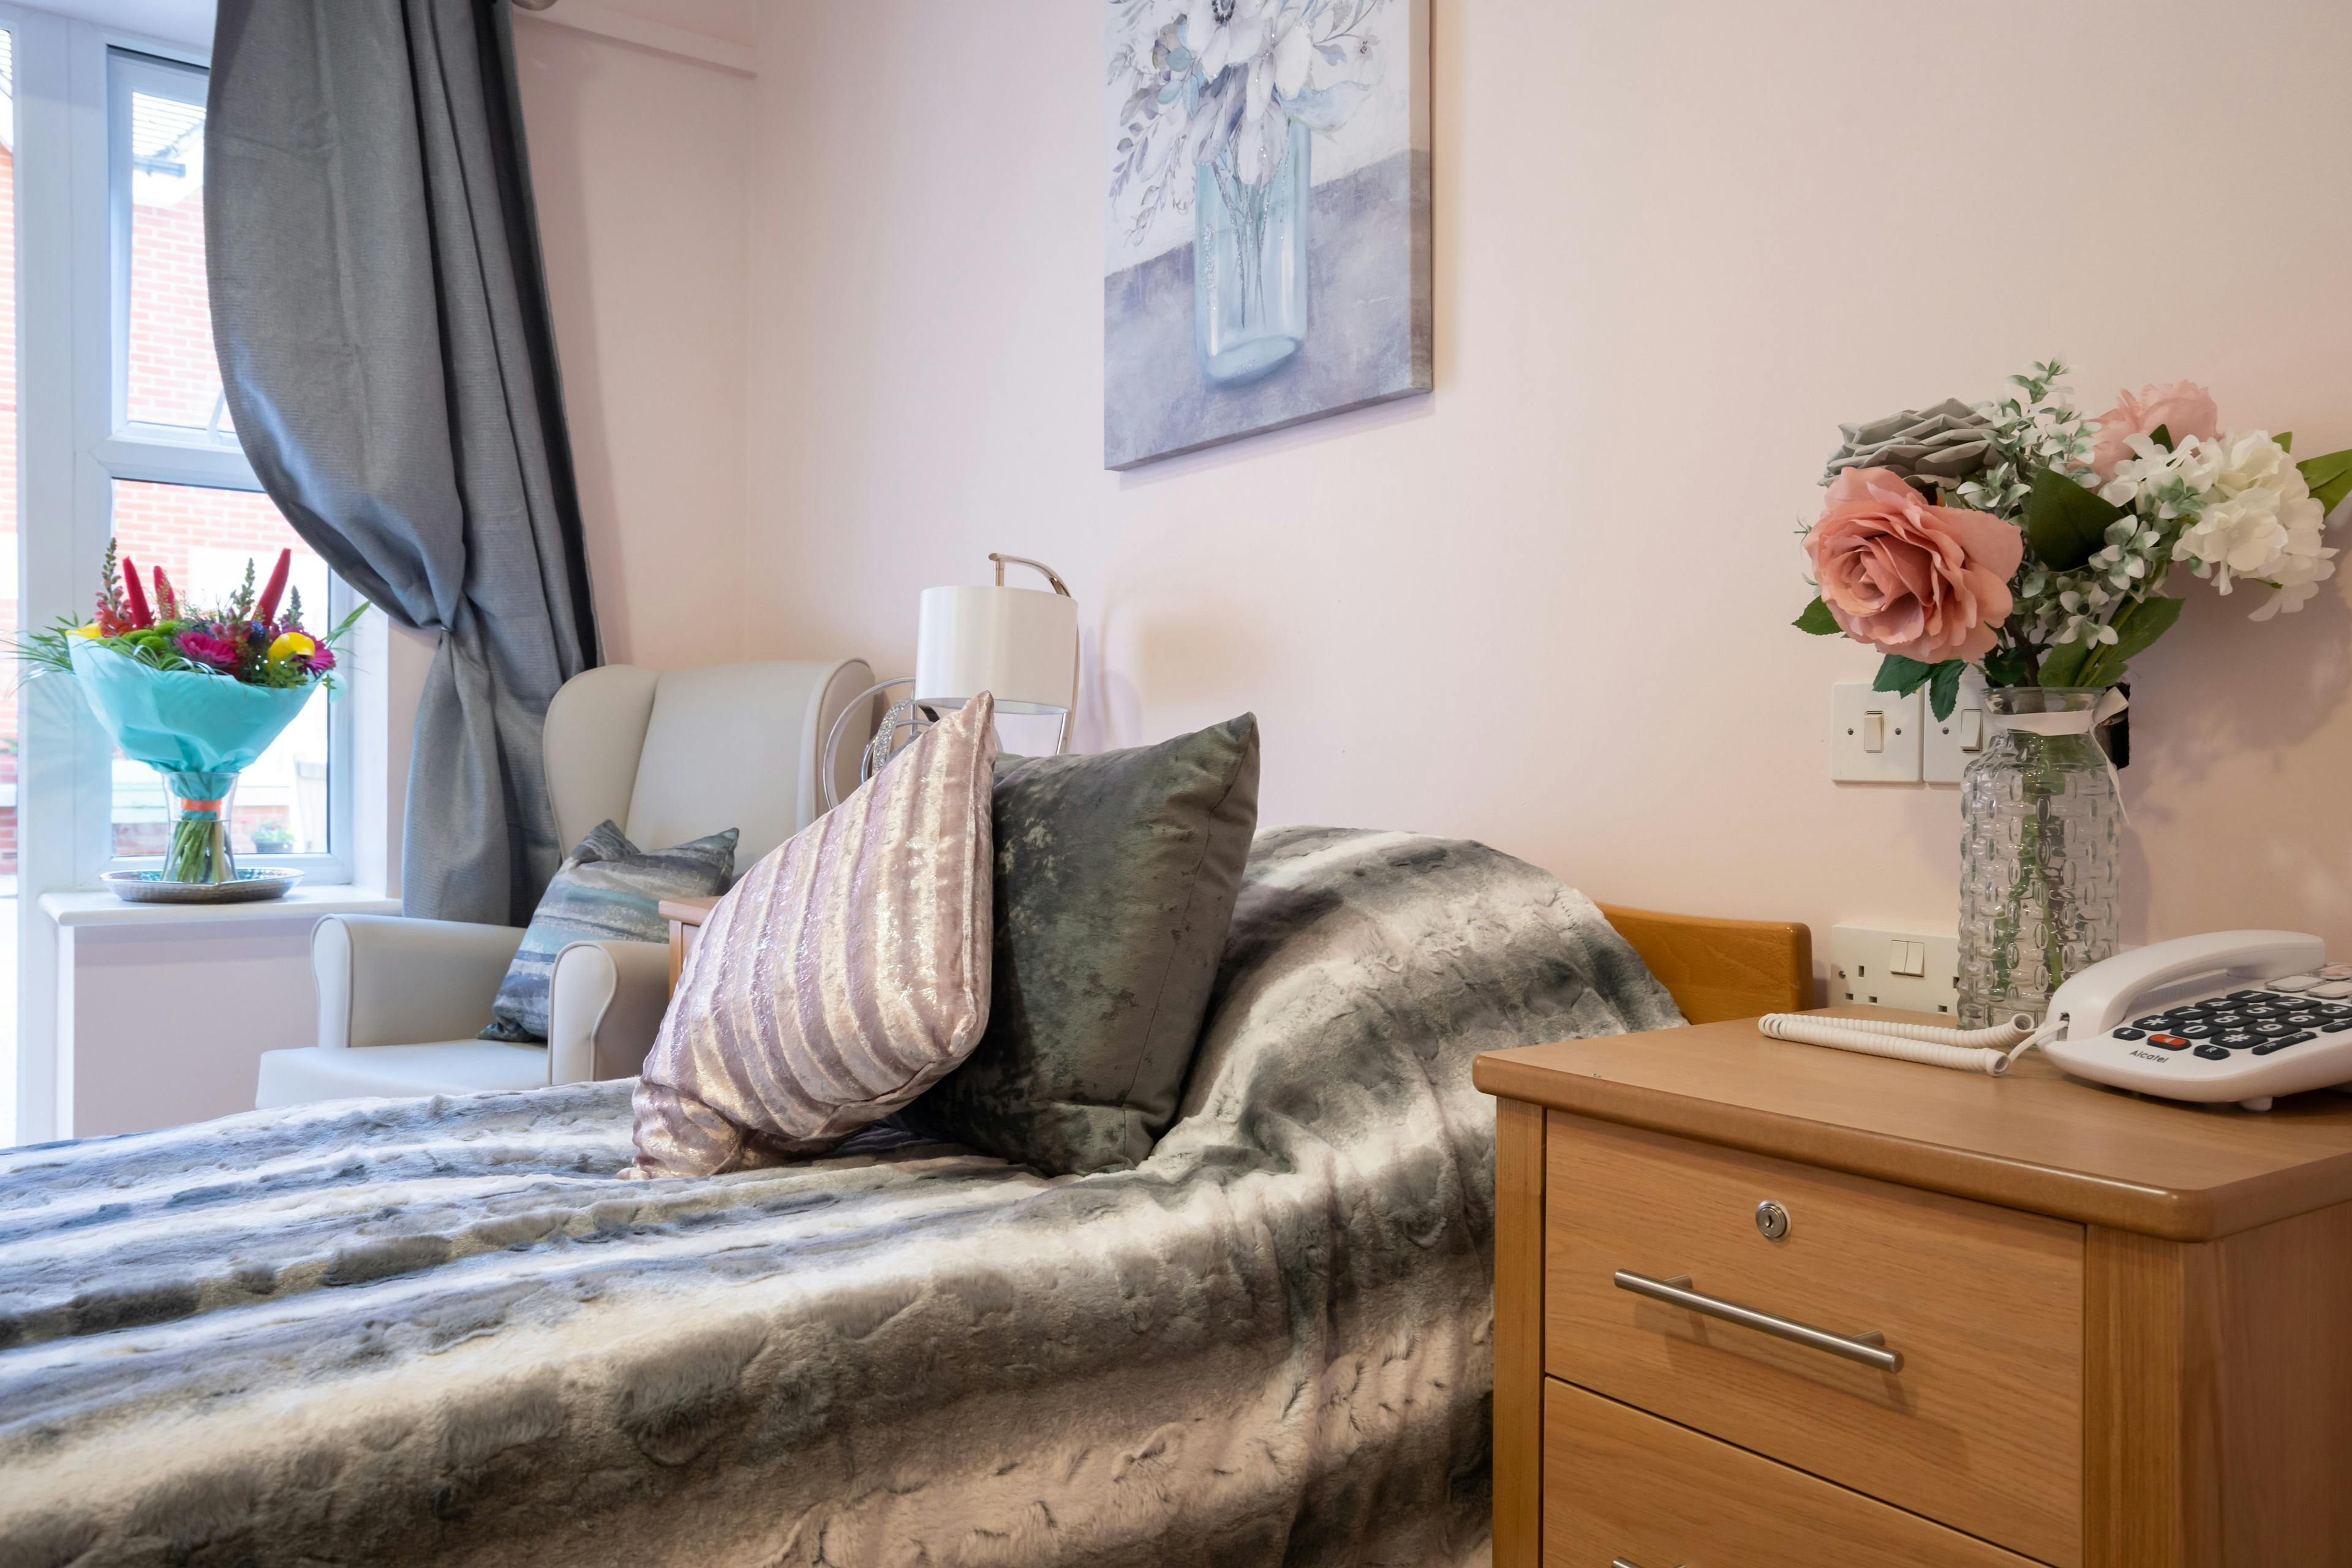 Bedroom of Branksome Park care home in Poole, Dorset